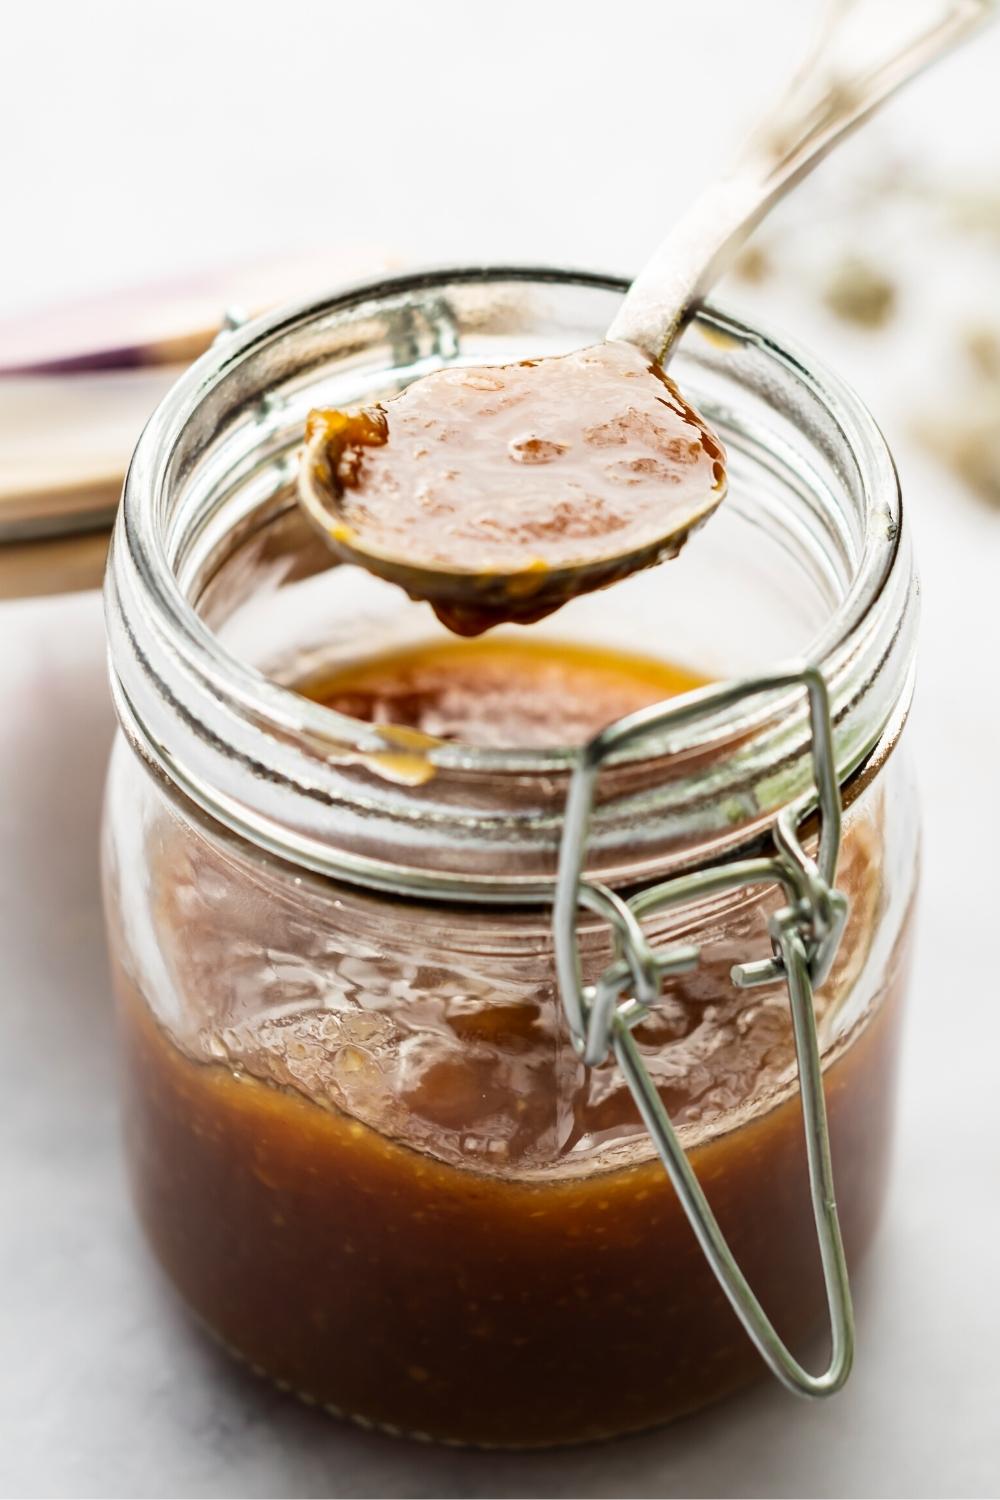 A spoon that has sweet and sour sauce on it over the top of a glass jar with the sauce in it.